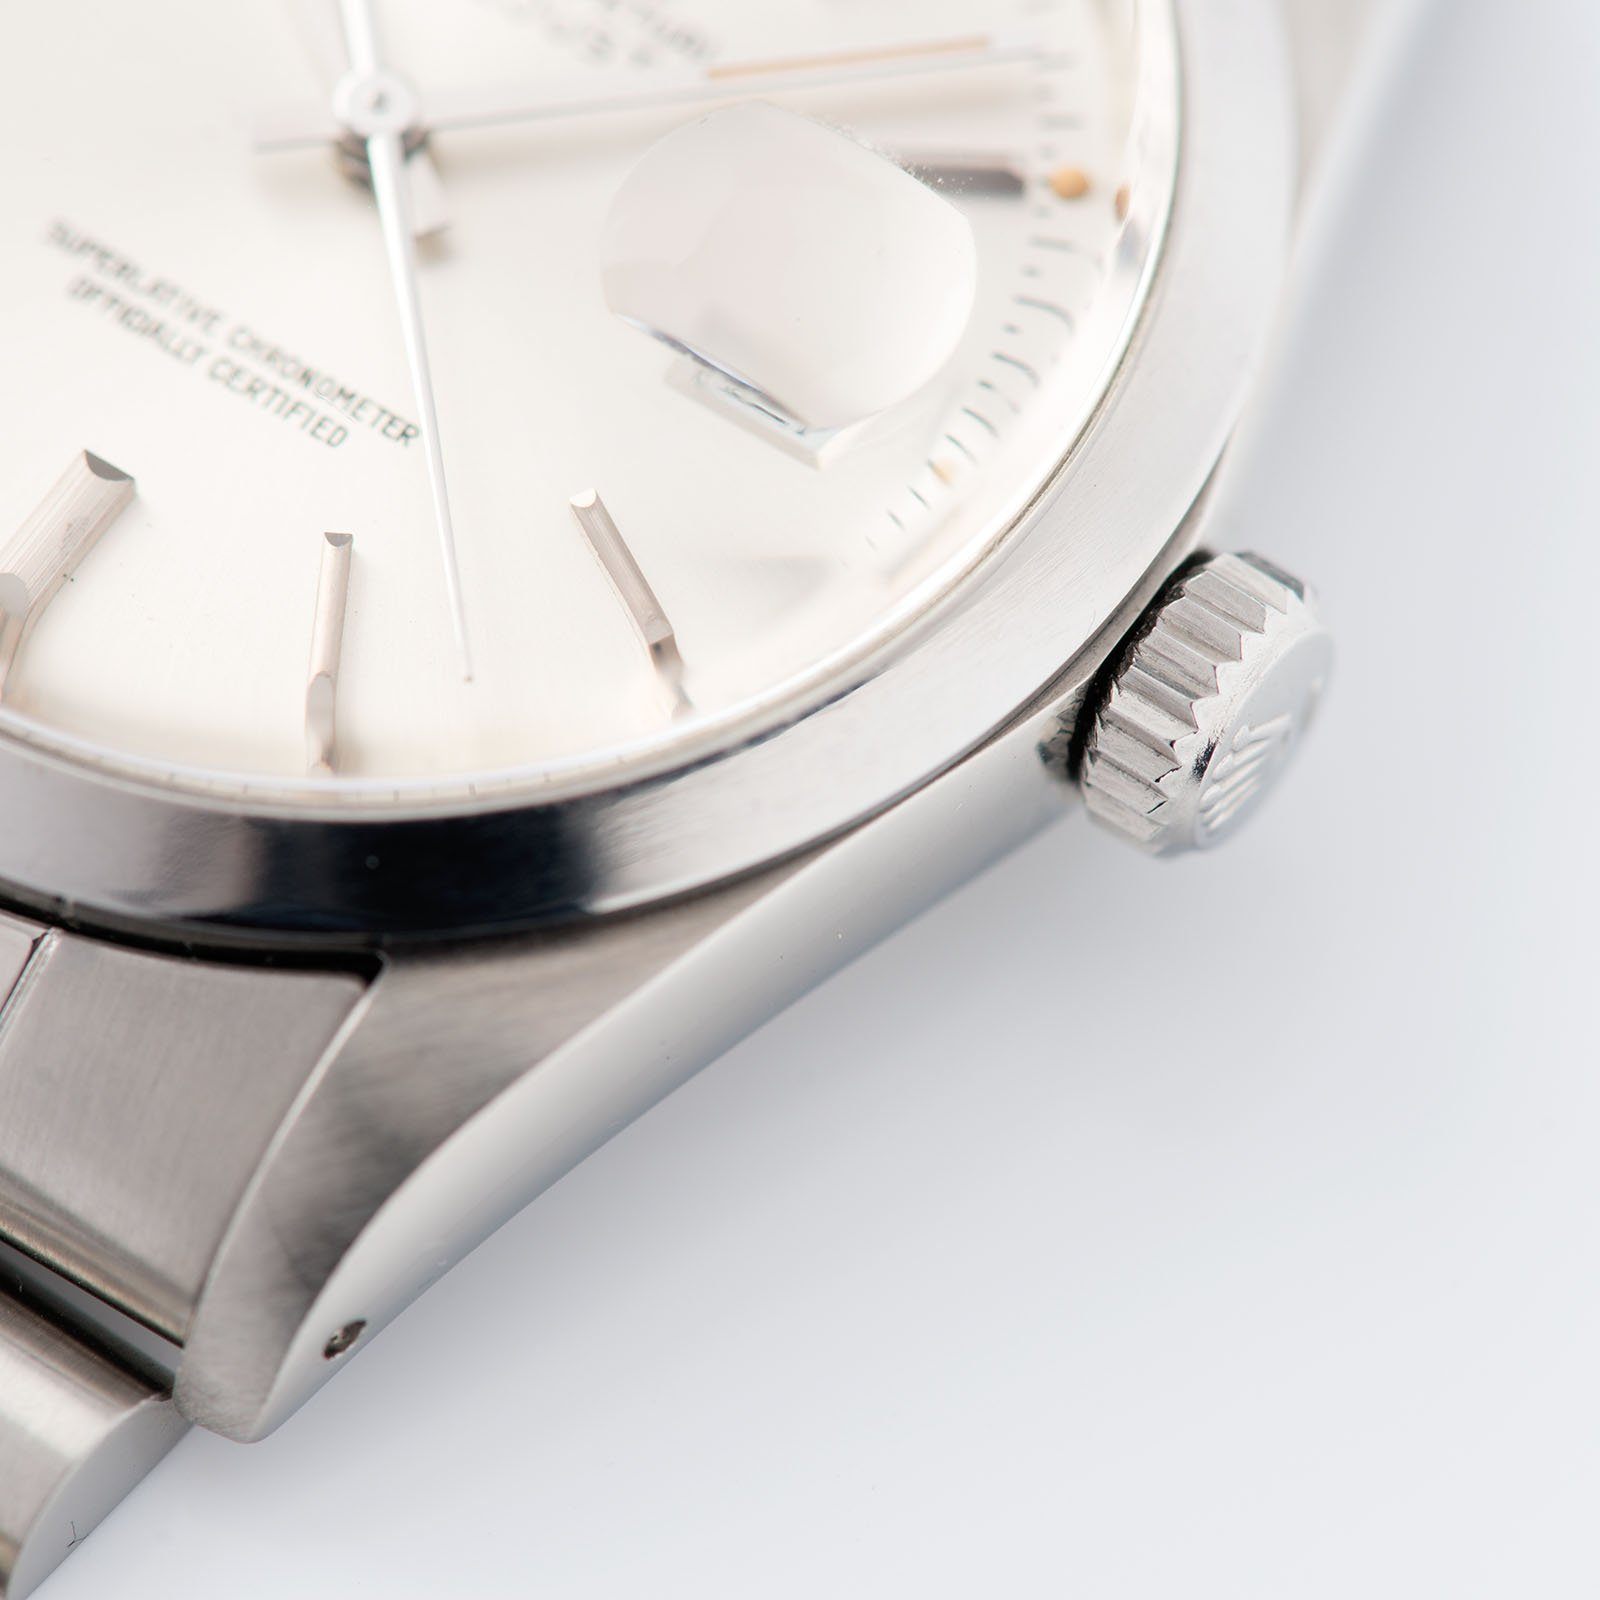 Rolex Datejust Reference 16000 Silver Dial Papers